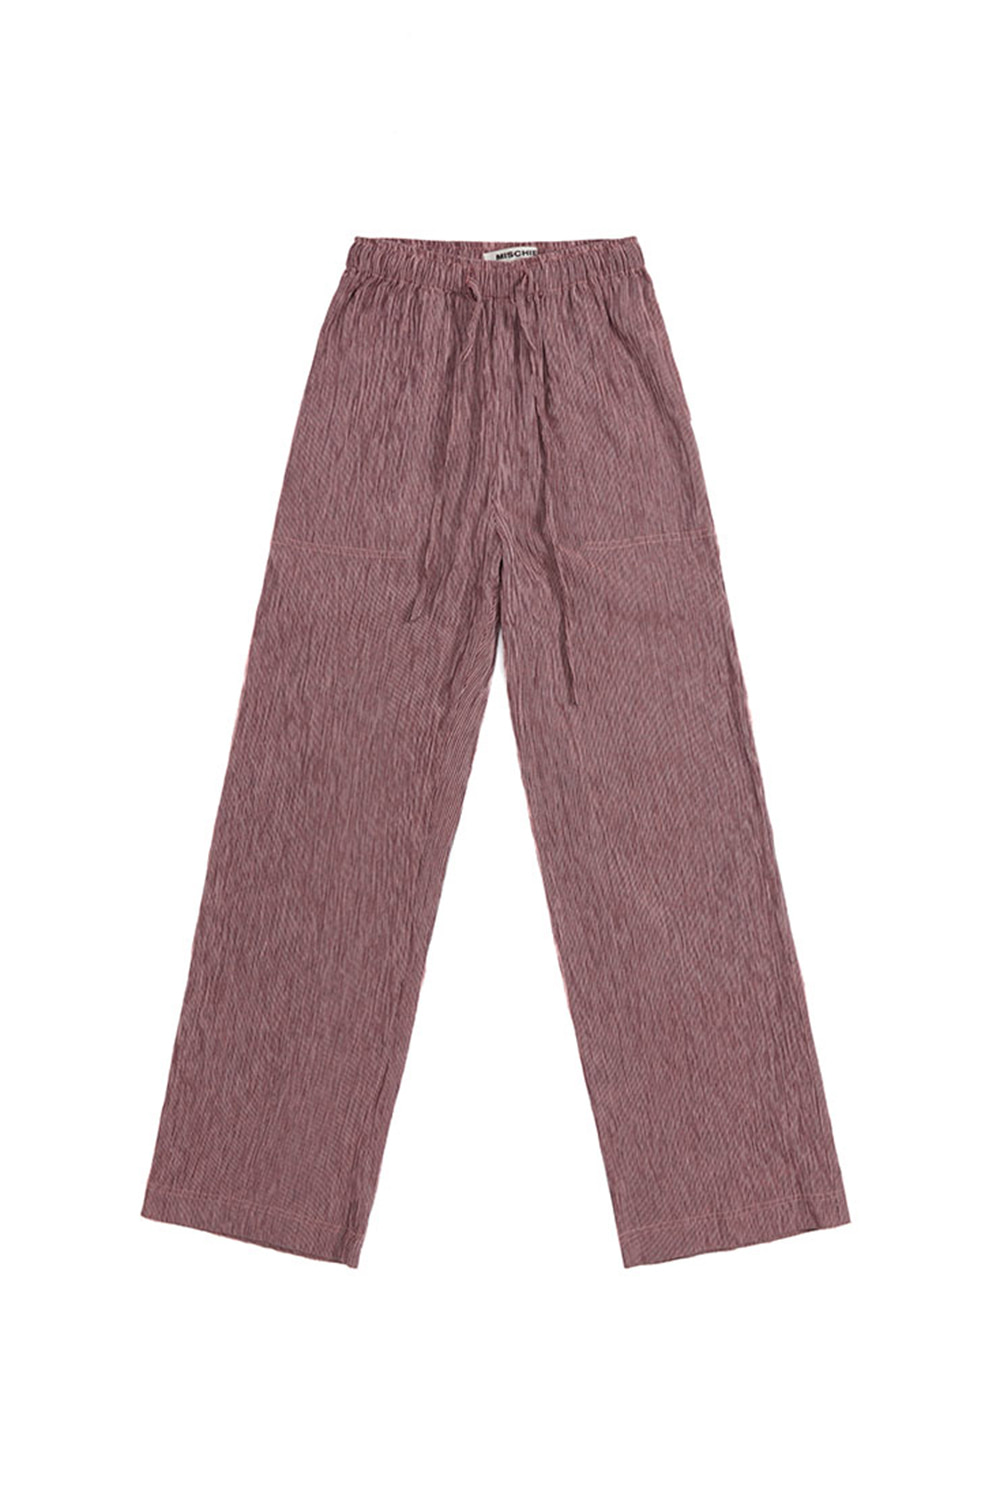 WRINKLED COTTON TROUSERS_pink/gray